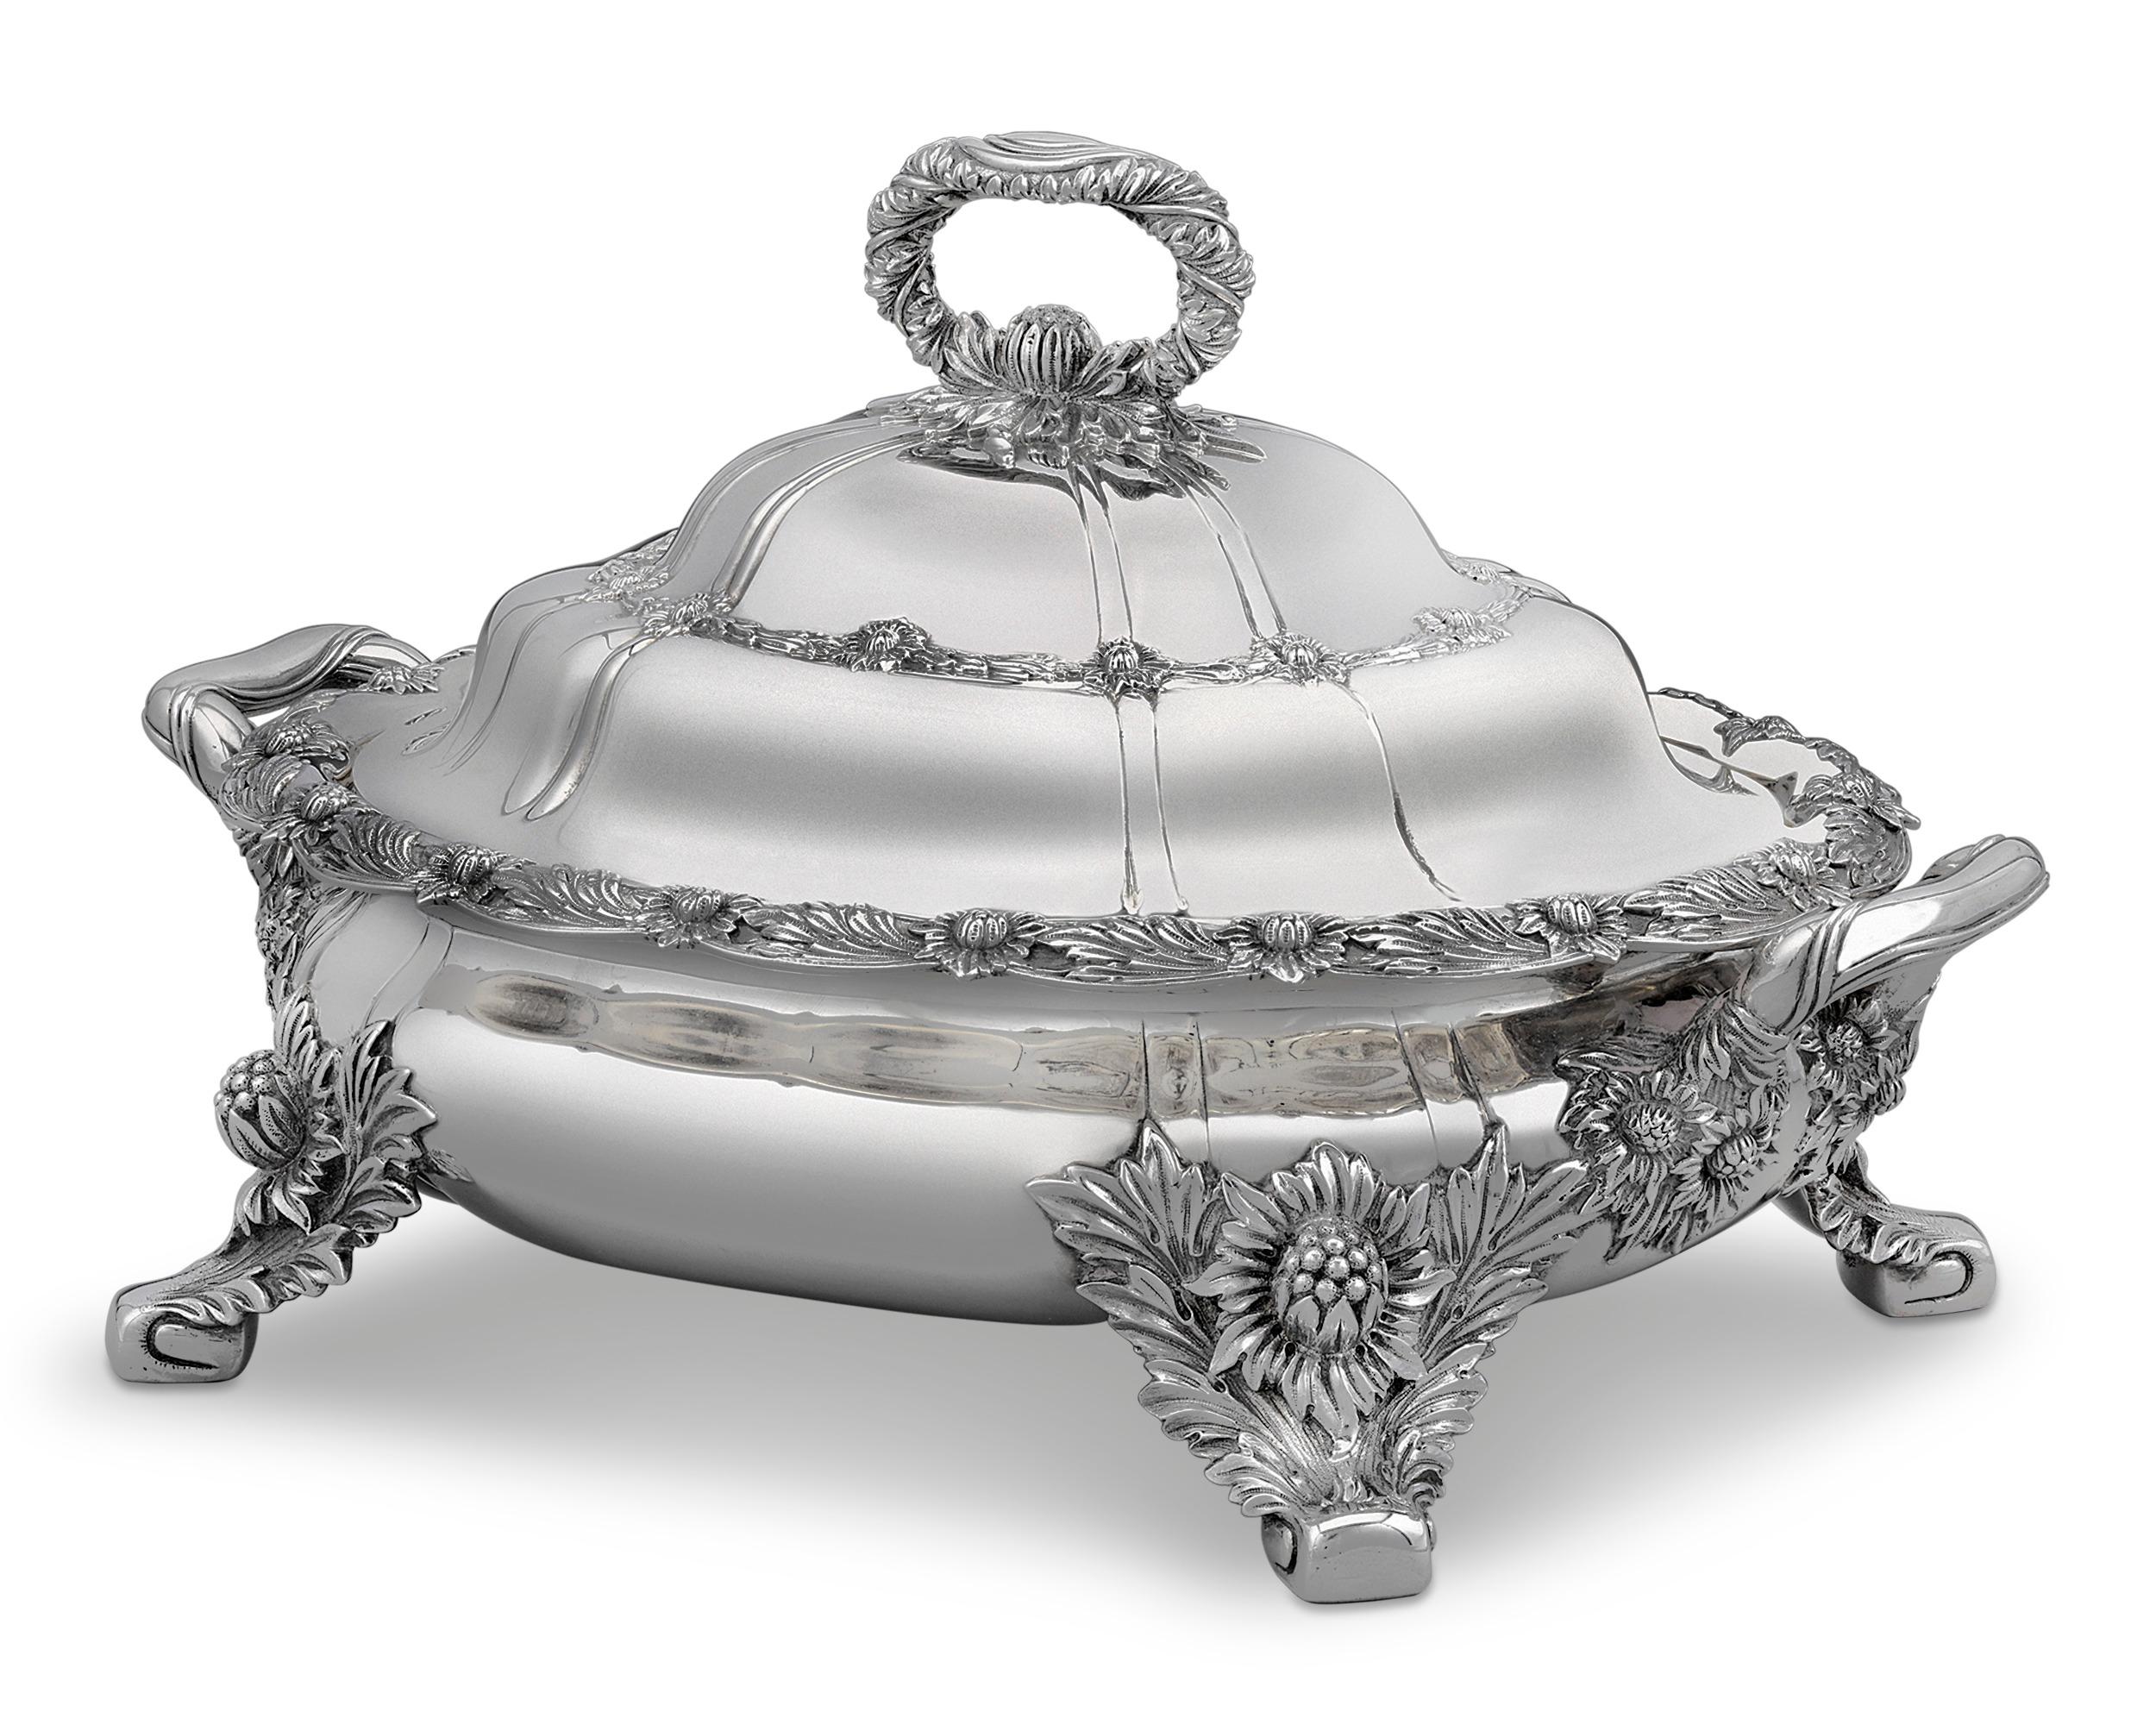 This magnificent sterling silver vegetable serving dish with cover by Tiffany & Co. is crafted in the iconic Chrysanthemum pattern, arguably the most desirable and definitely one of the most expensive created by this renowned American firm.